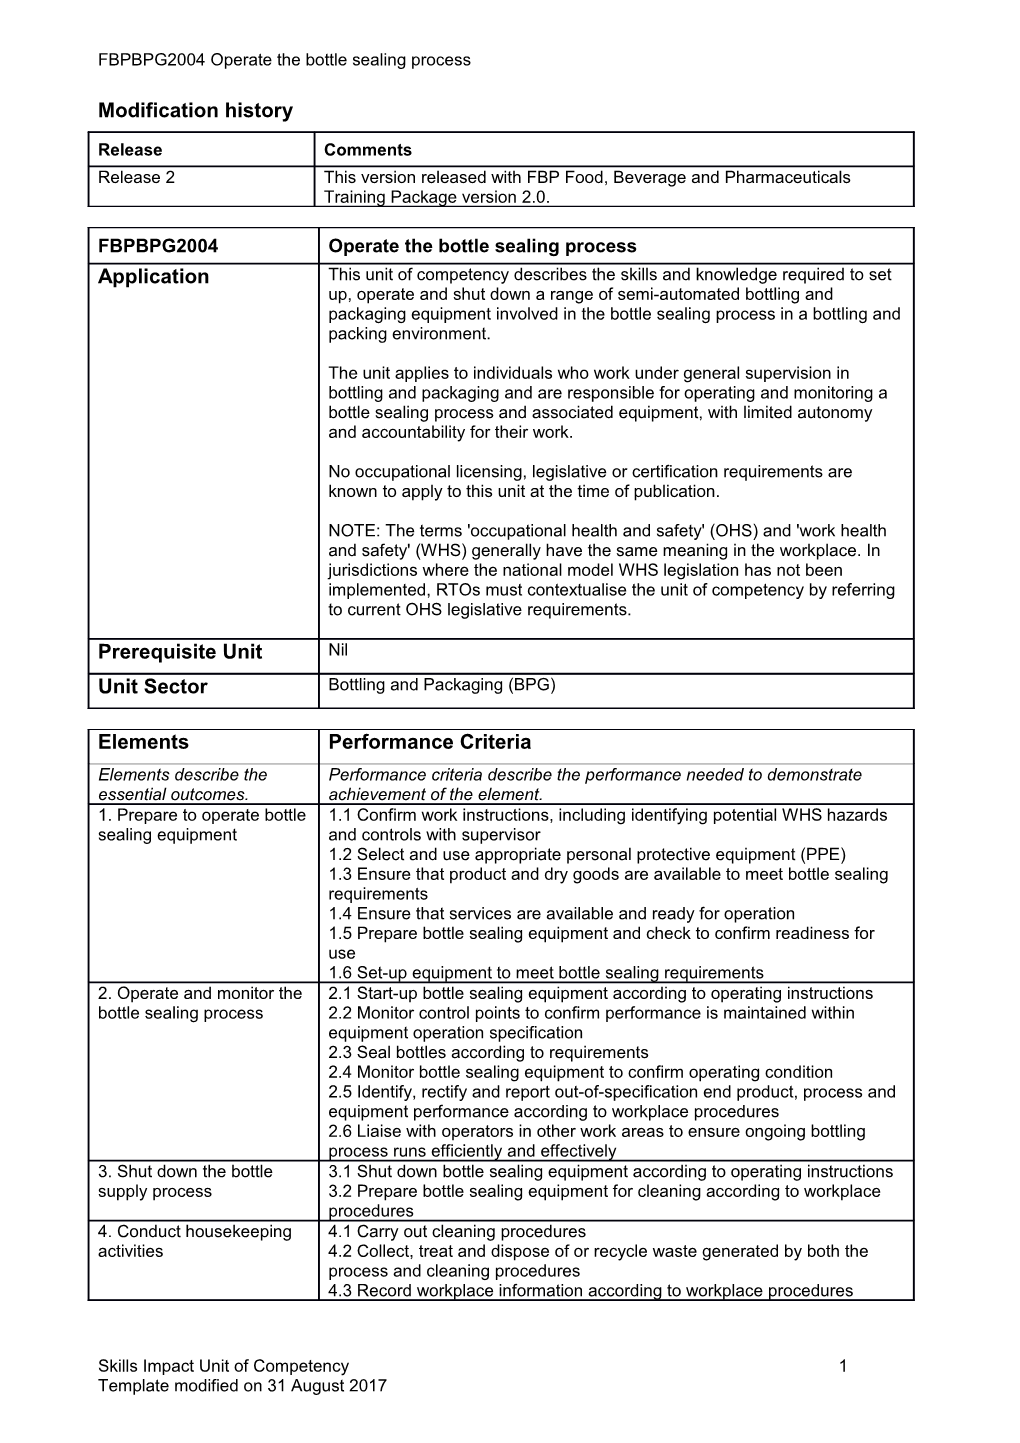 Skills Impact Unit of Competency Template s11